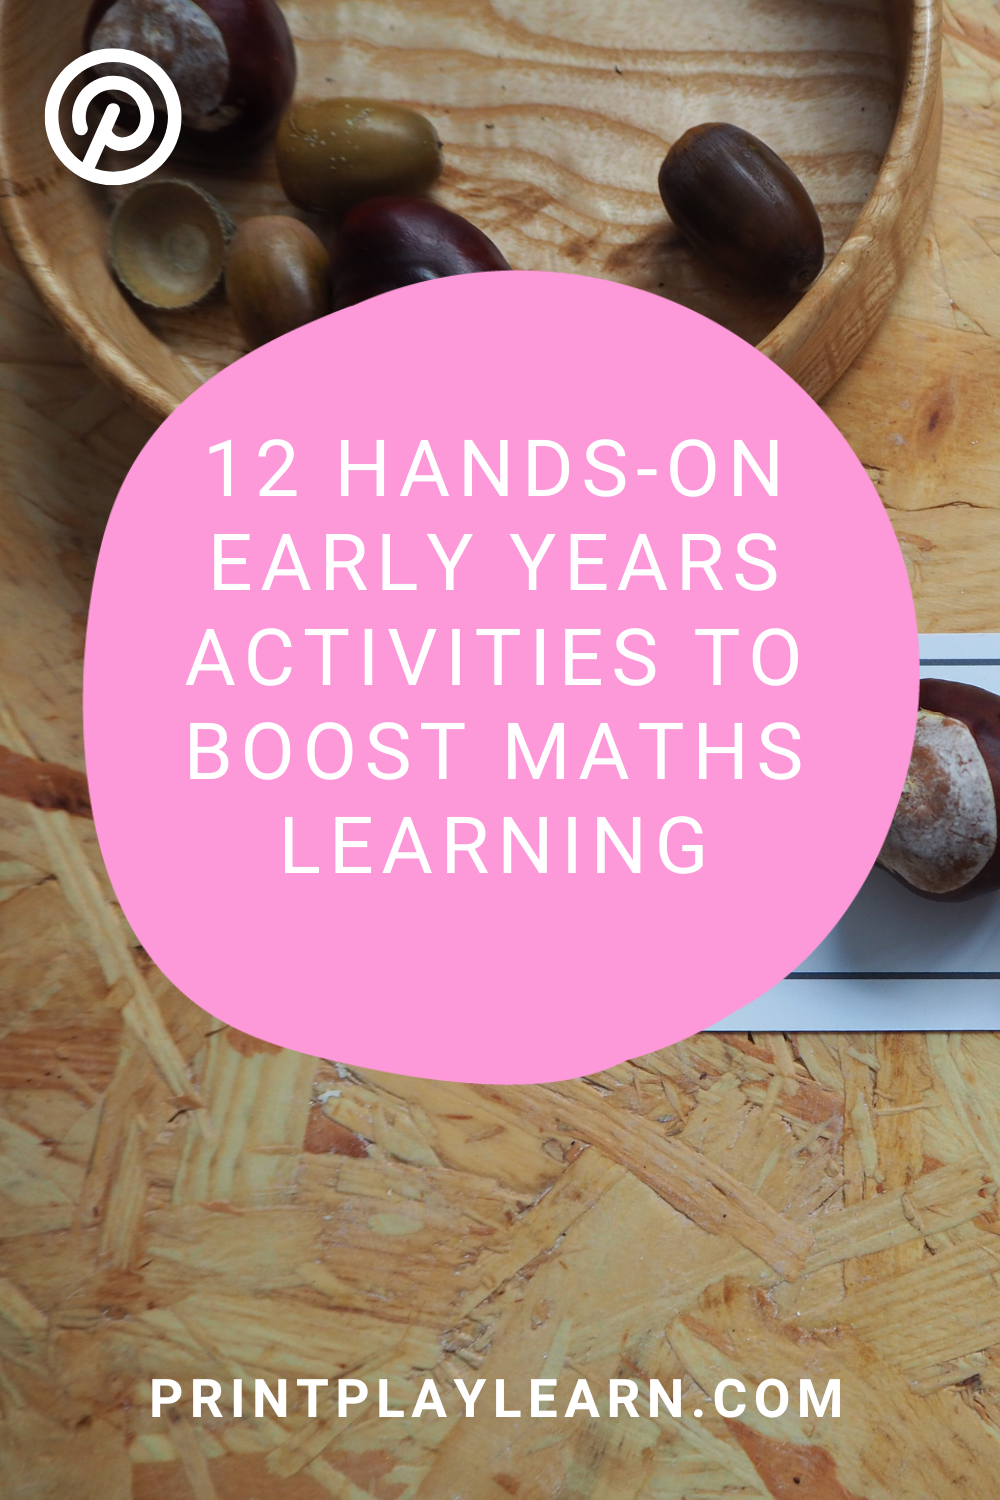 12 hands-on early years activities to booster maths learning print play learn white on pink